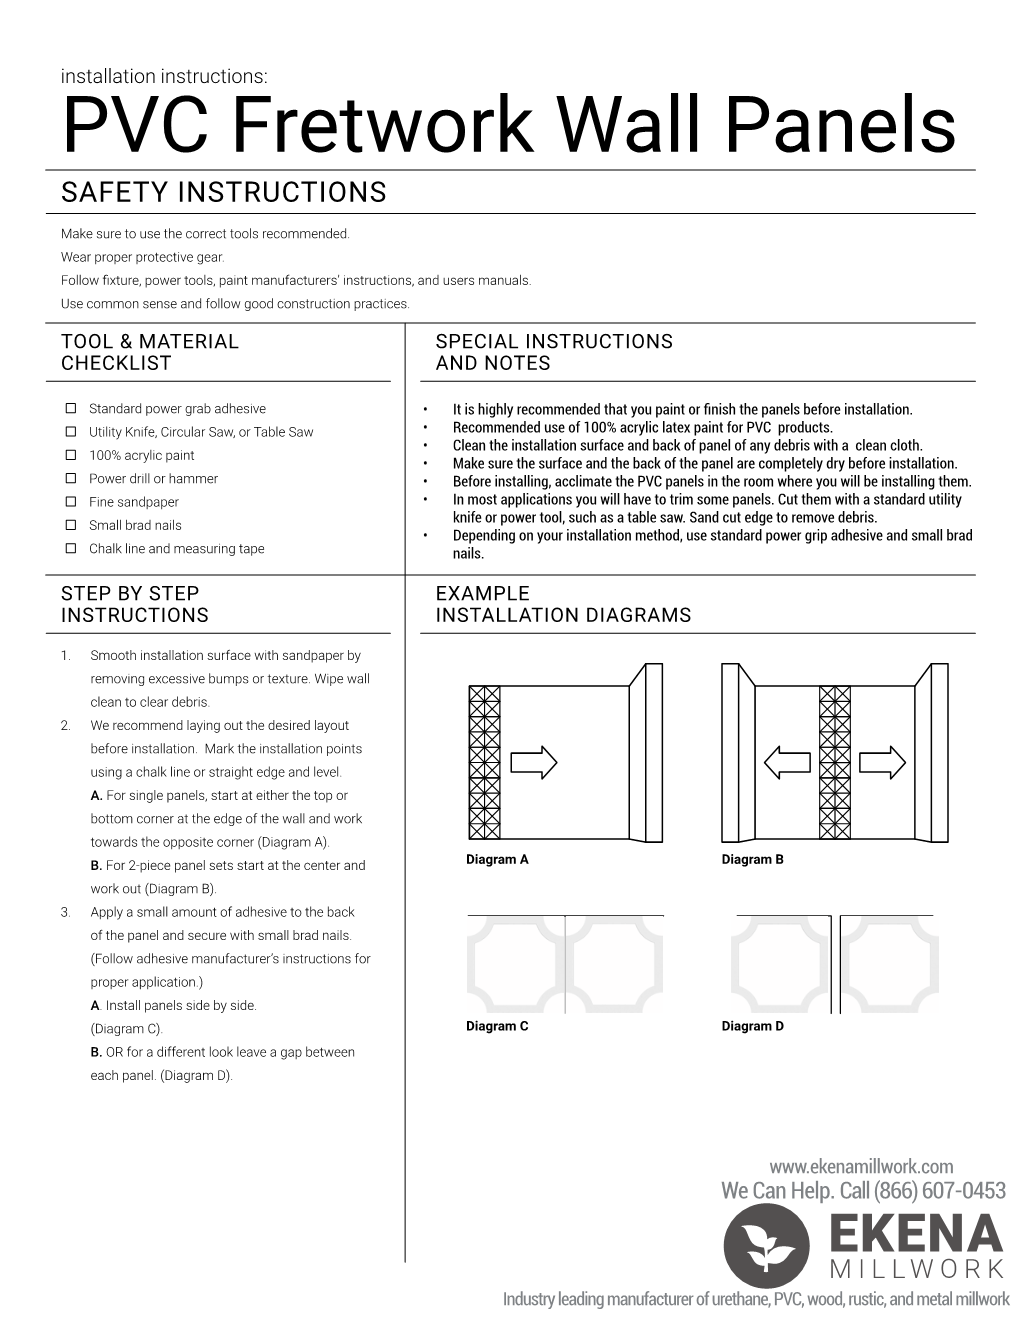 PVC Fretwork Wall Panels SAFETY INSTRUCTIONS